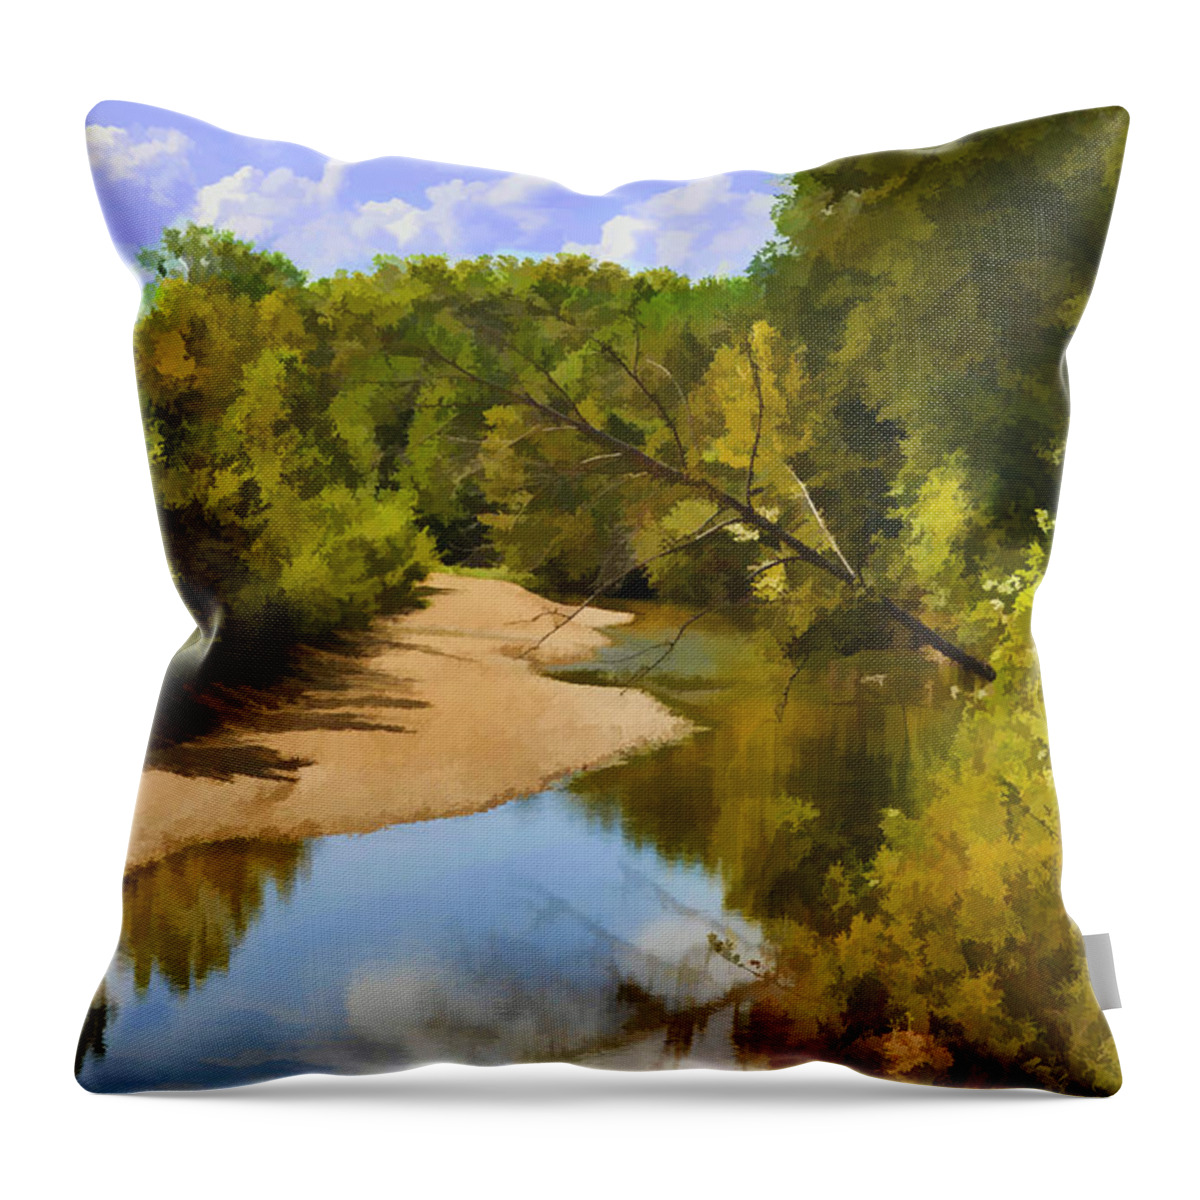 River Throw Pillow featuring the photograph Small river in So. Missouri 3 - Digital Paint by Debbie Portwood